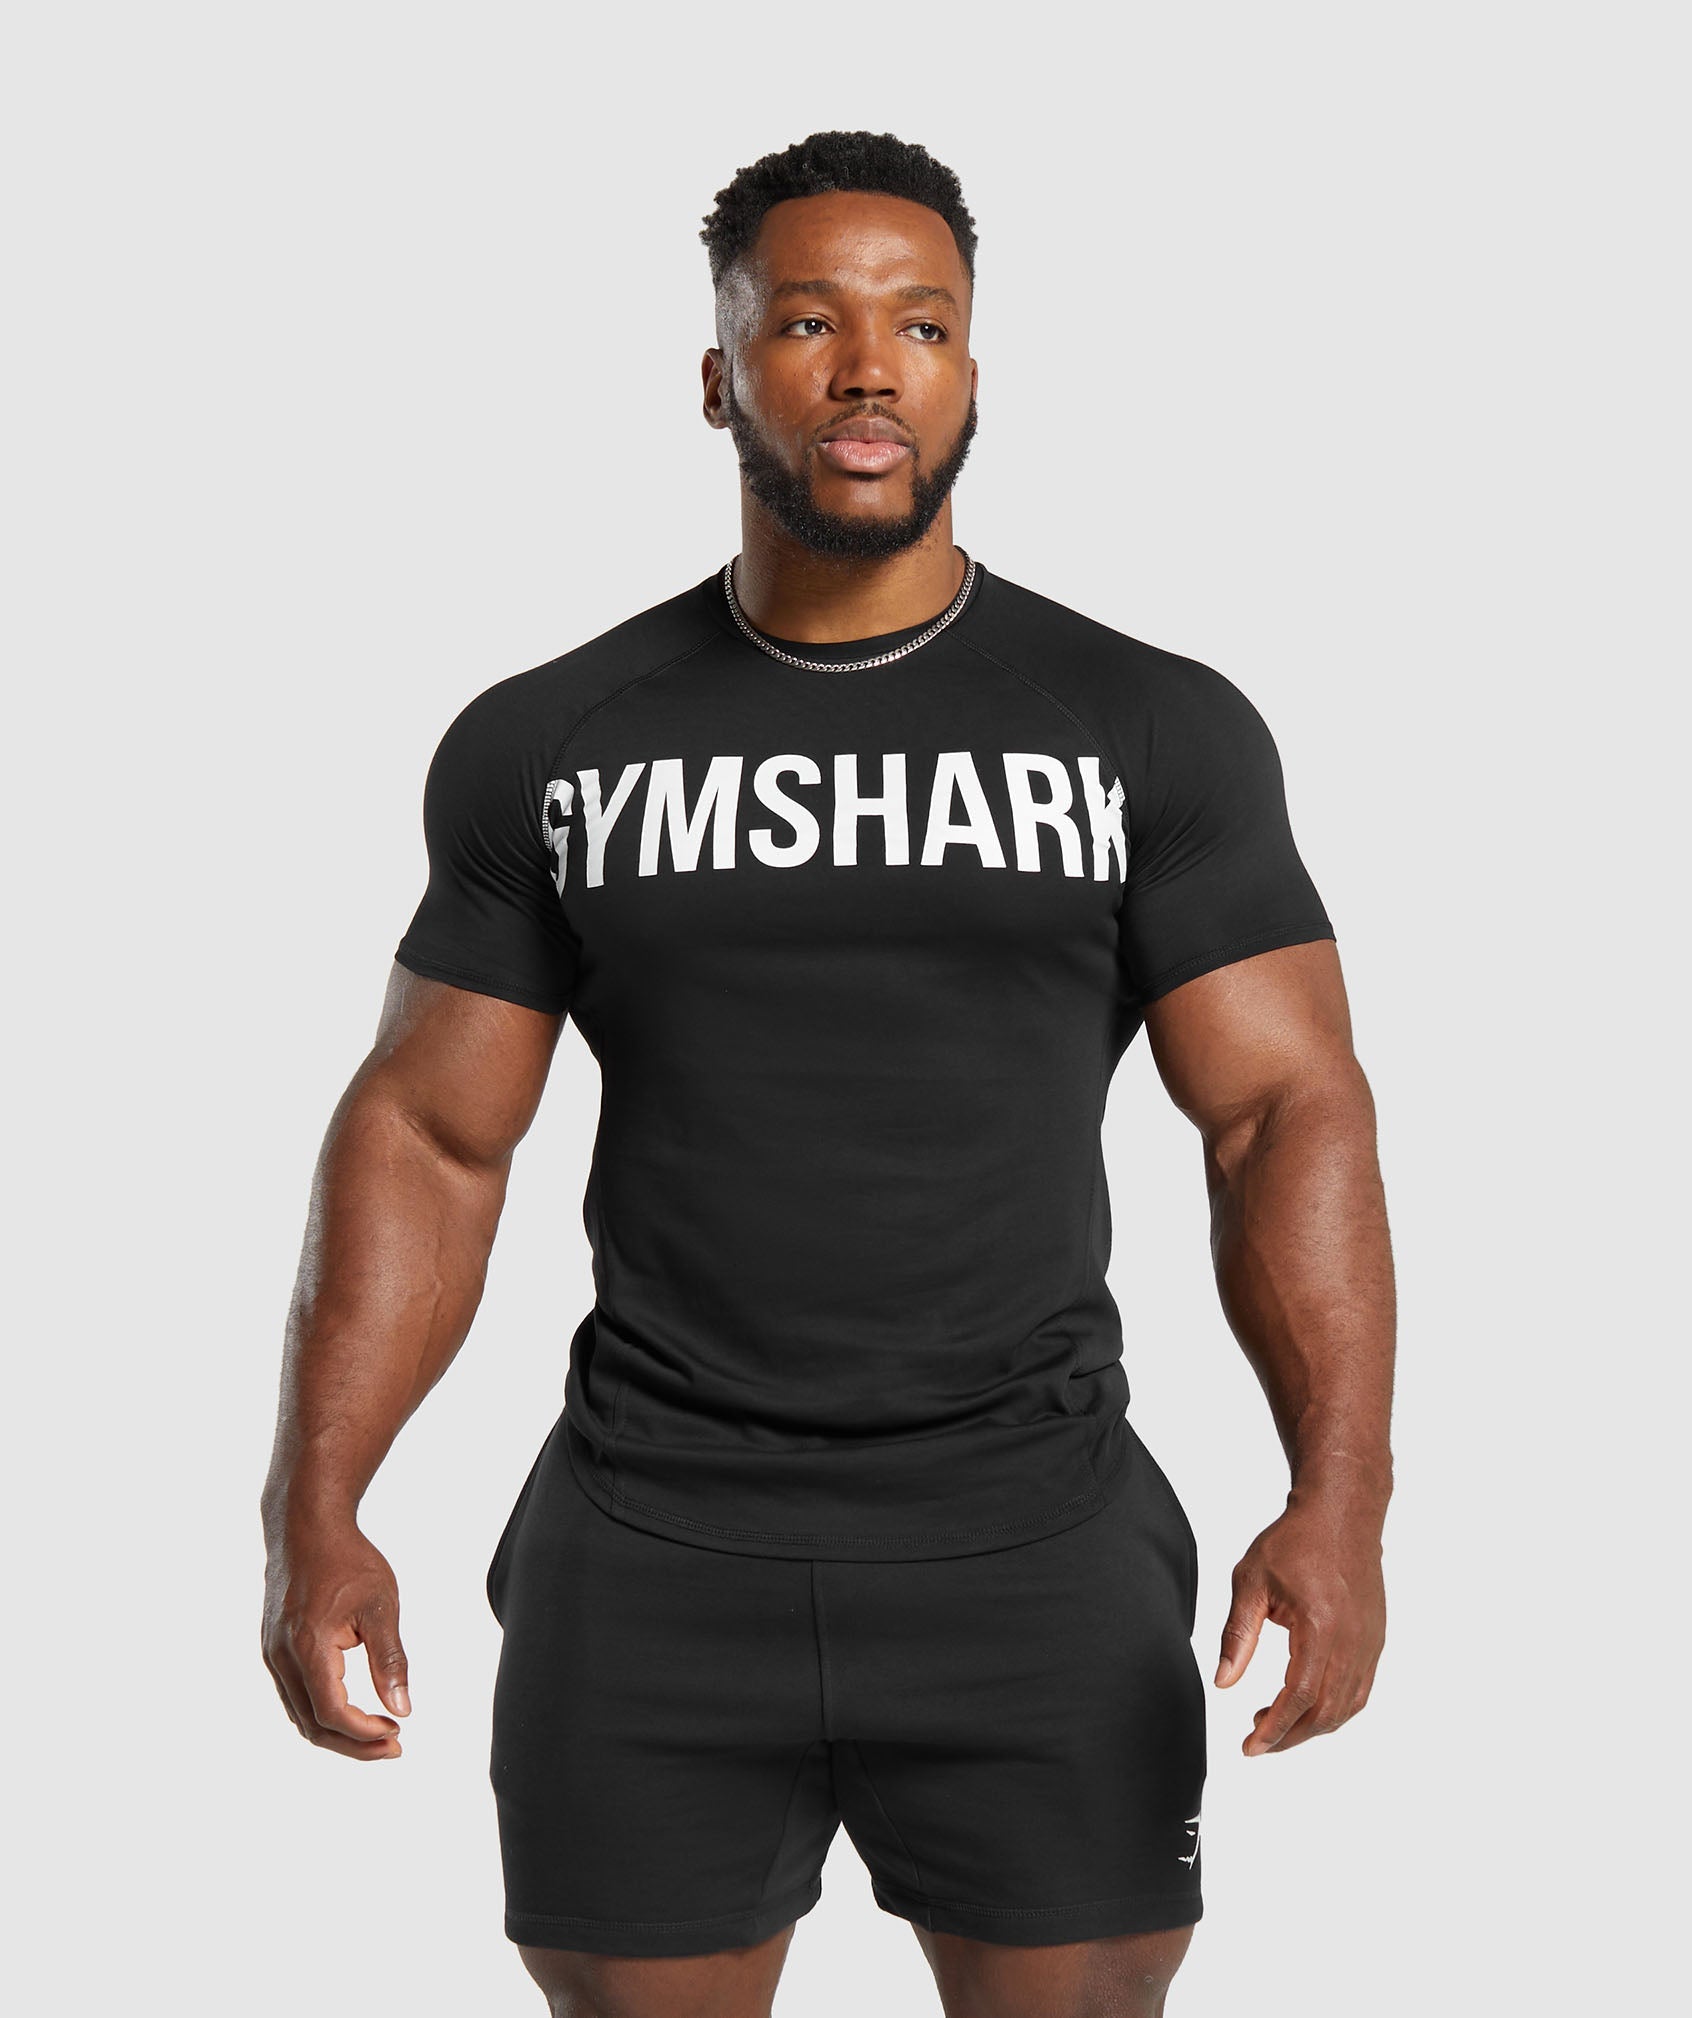 Impact Muscle T-Shirt in Black - view 1